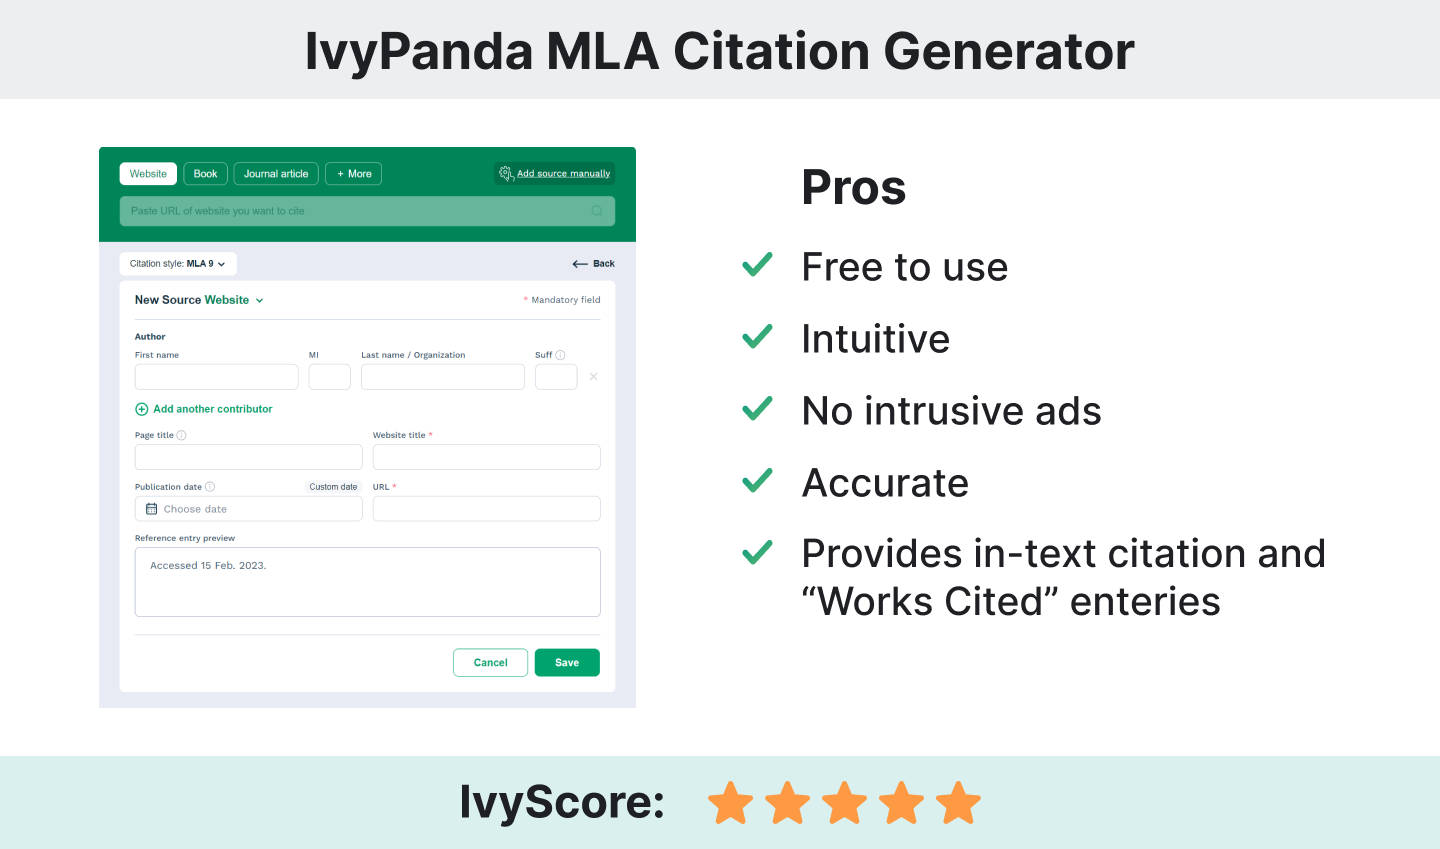 The picture illustrates the key features of the MLA citation generator by IvyPanda.